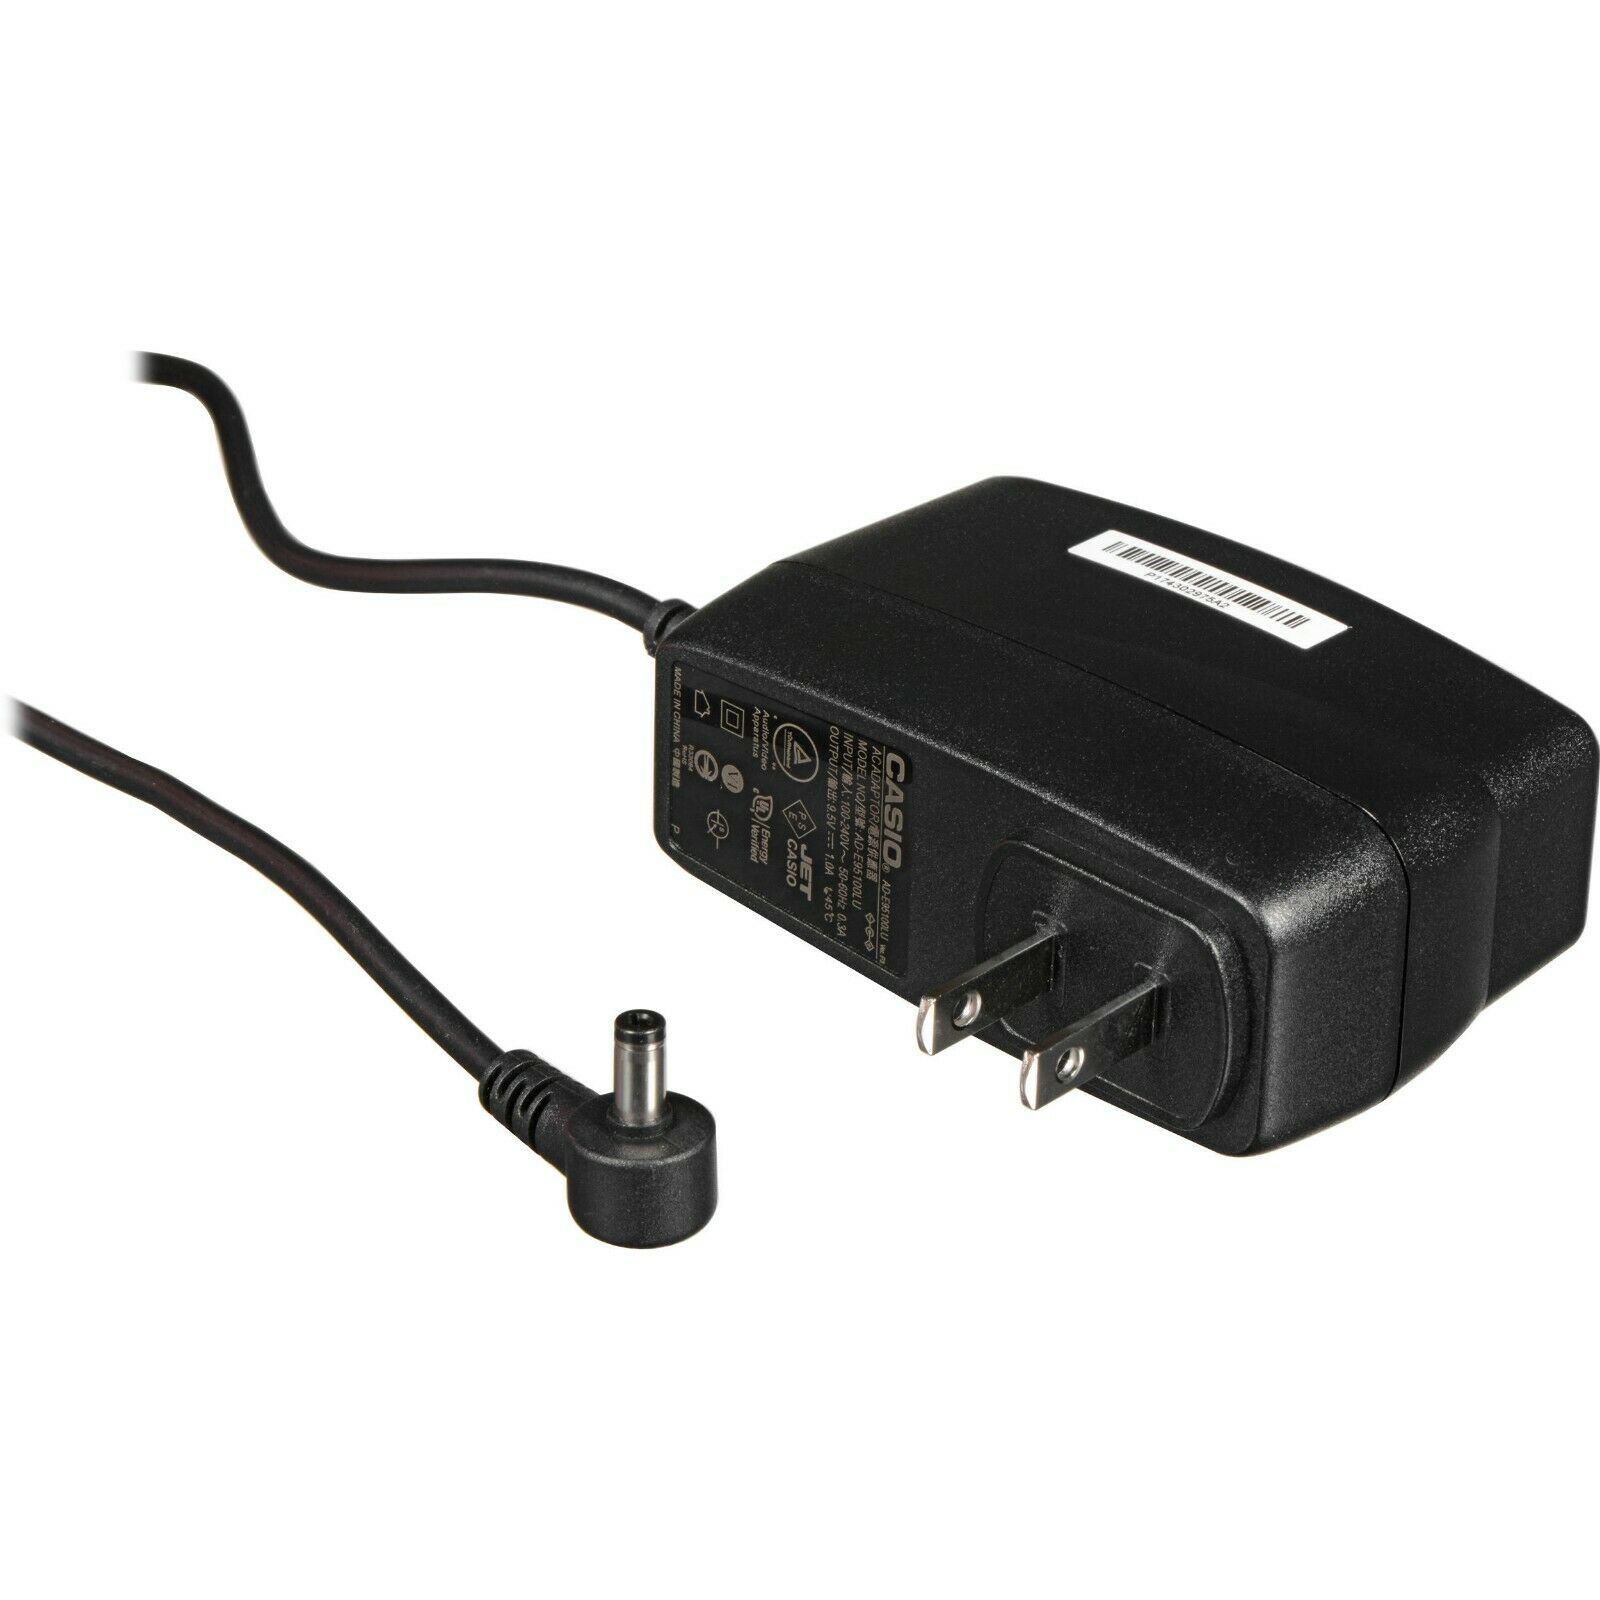 AKG SR40S Radio Mic 12V 300mA AC Adaptor Charger For AKG Radio Mic 12V 0.3A Power Supply Mains Cable Length: 4ft./1.2